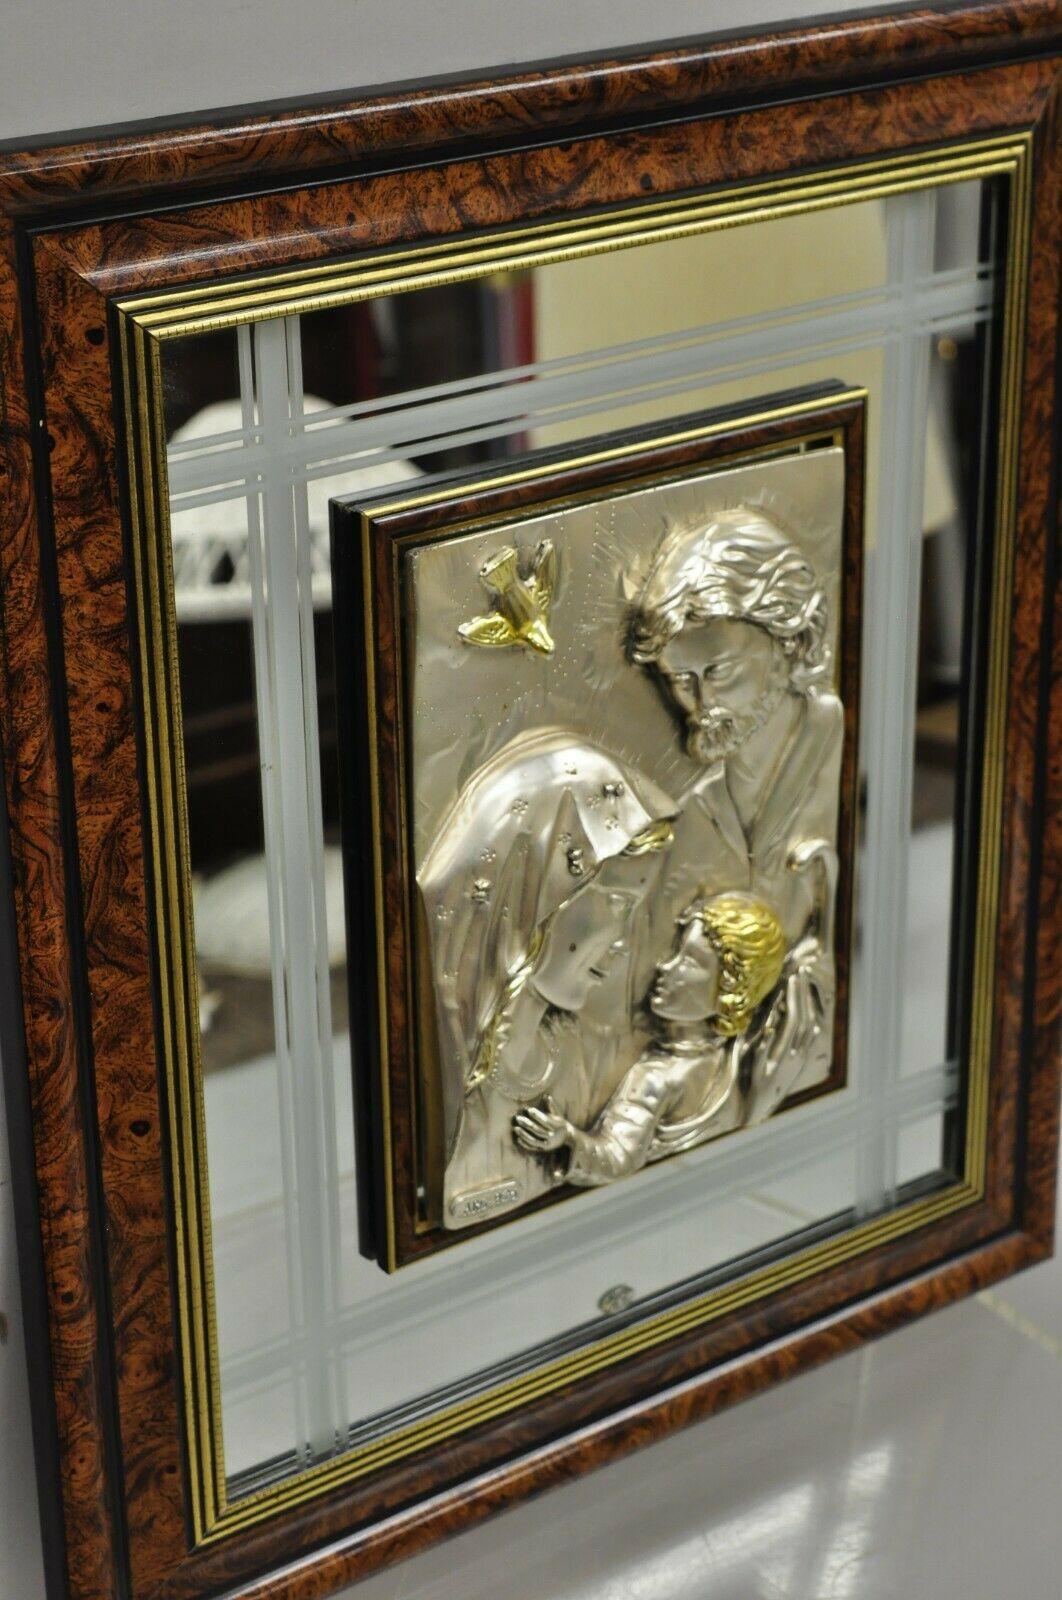 Creazioni Artistche 925 Sterling Silver ARG Italy Jesus Mary Mirror Wall Art. Item features a burlwood frame, mirror backing, debossed sterling silver *925* scene of Jesus, Mary, and Joseph, labels to rear and 